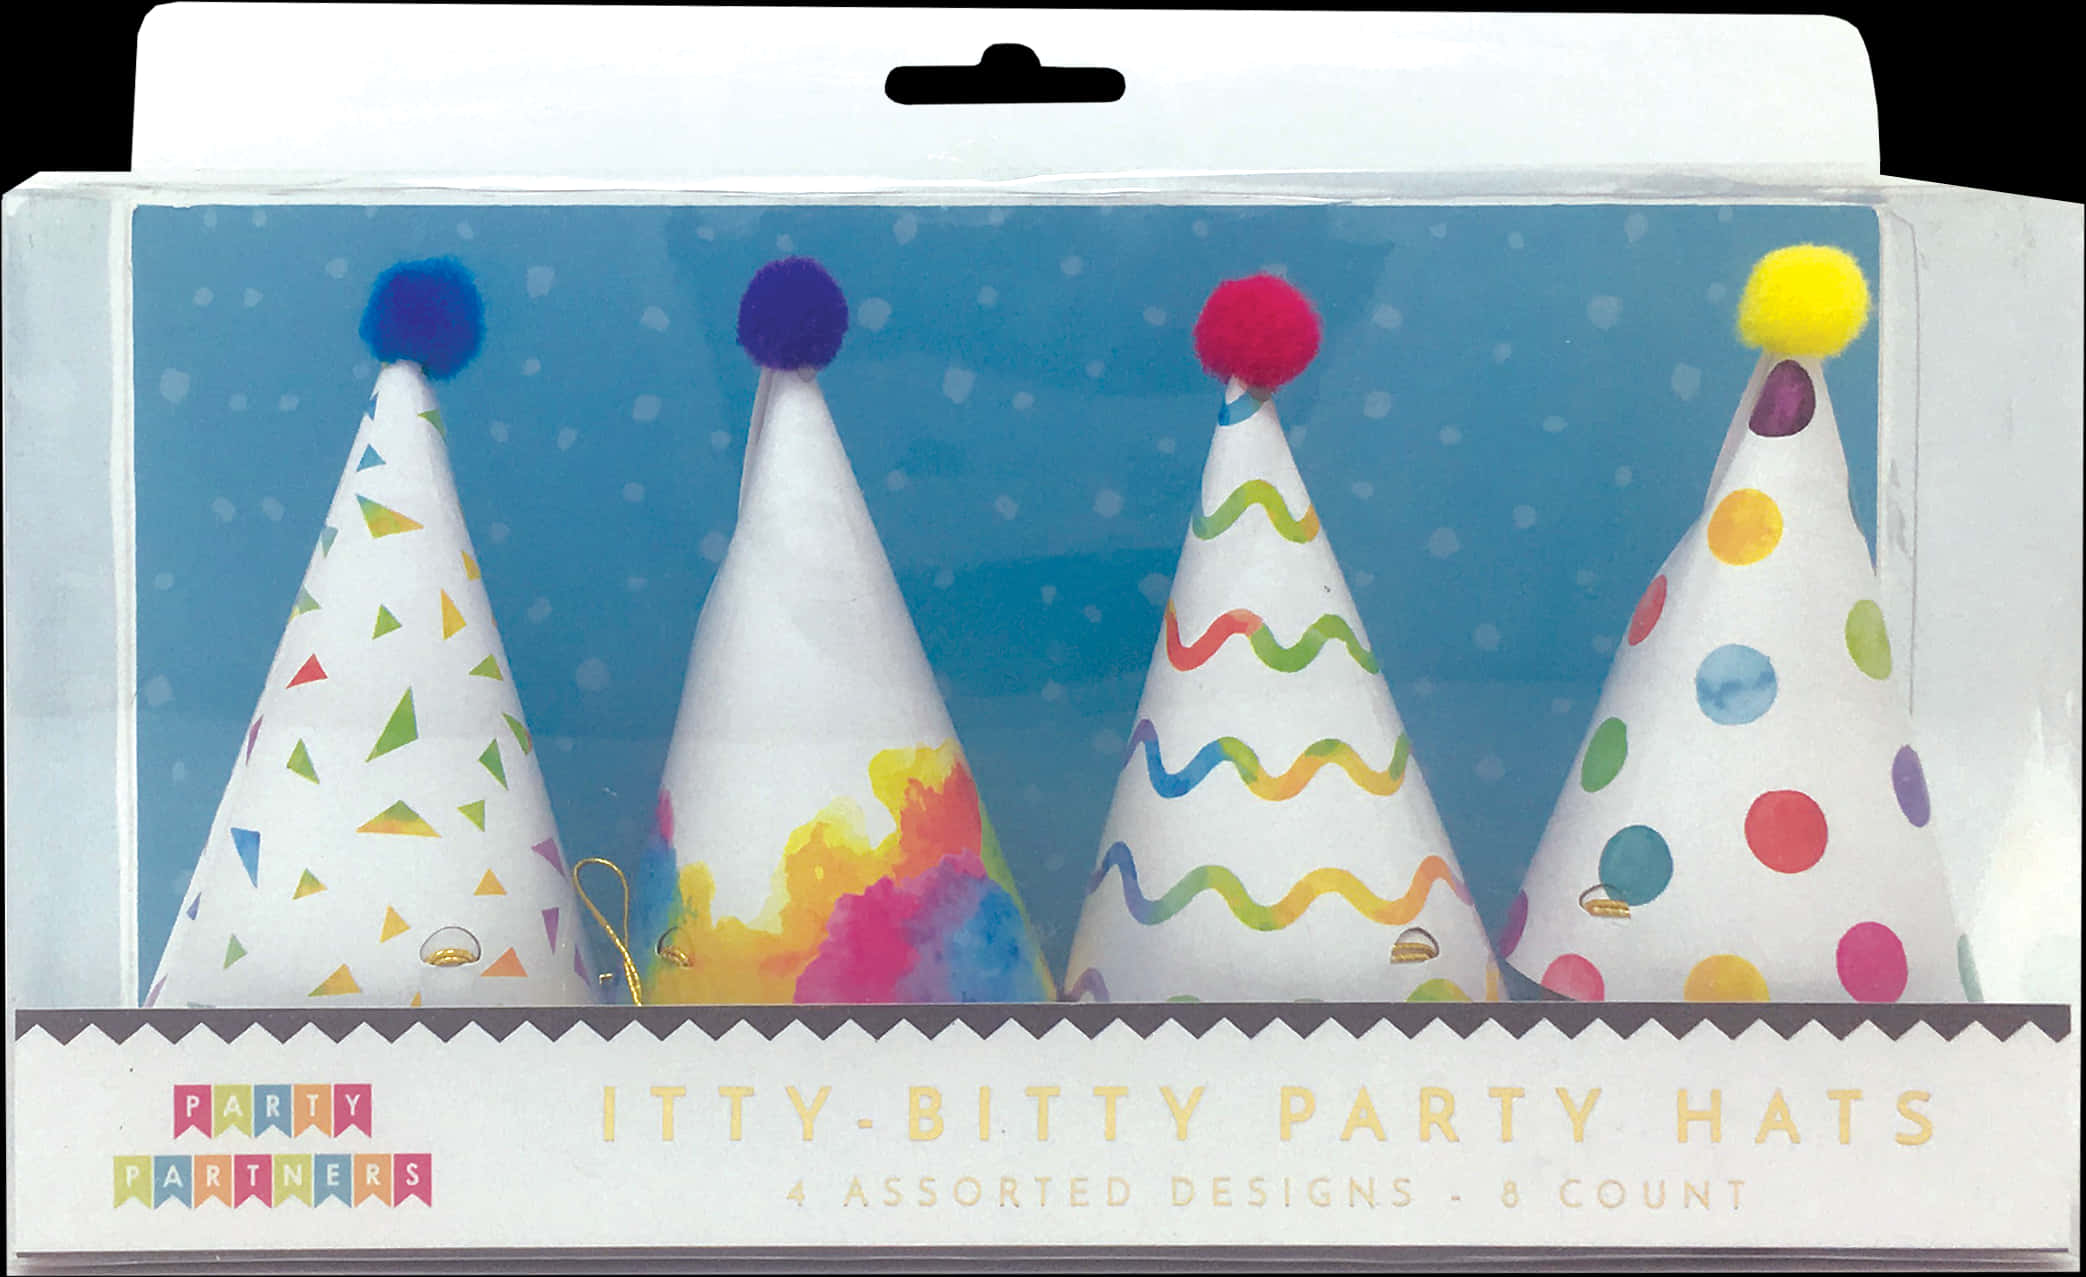 A Group Of Party Hats In A Package